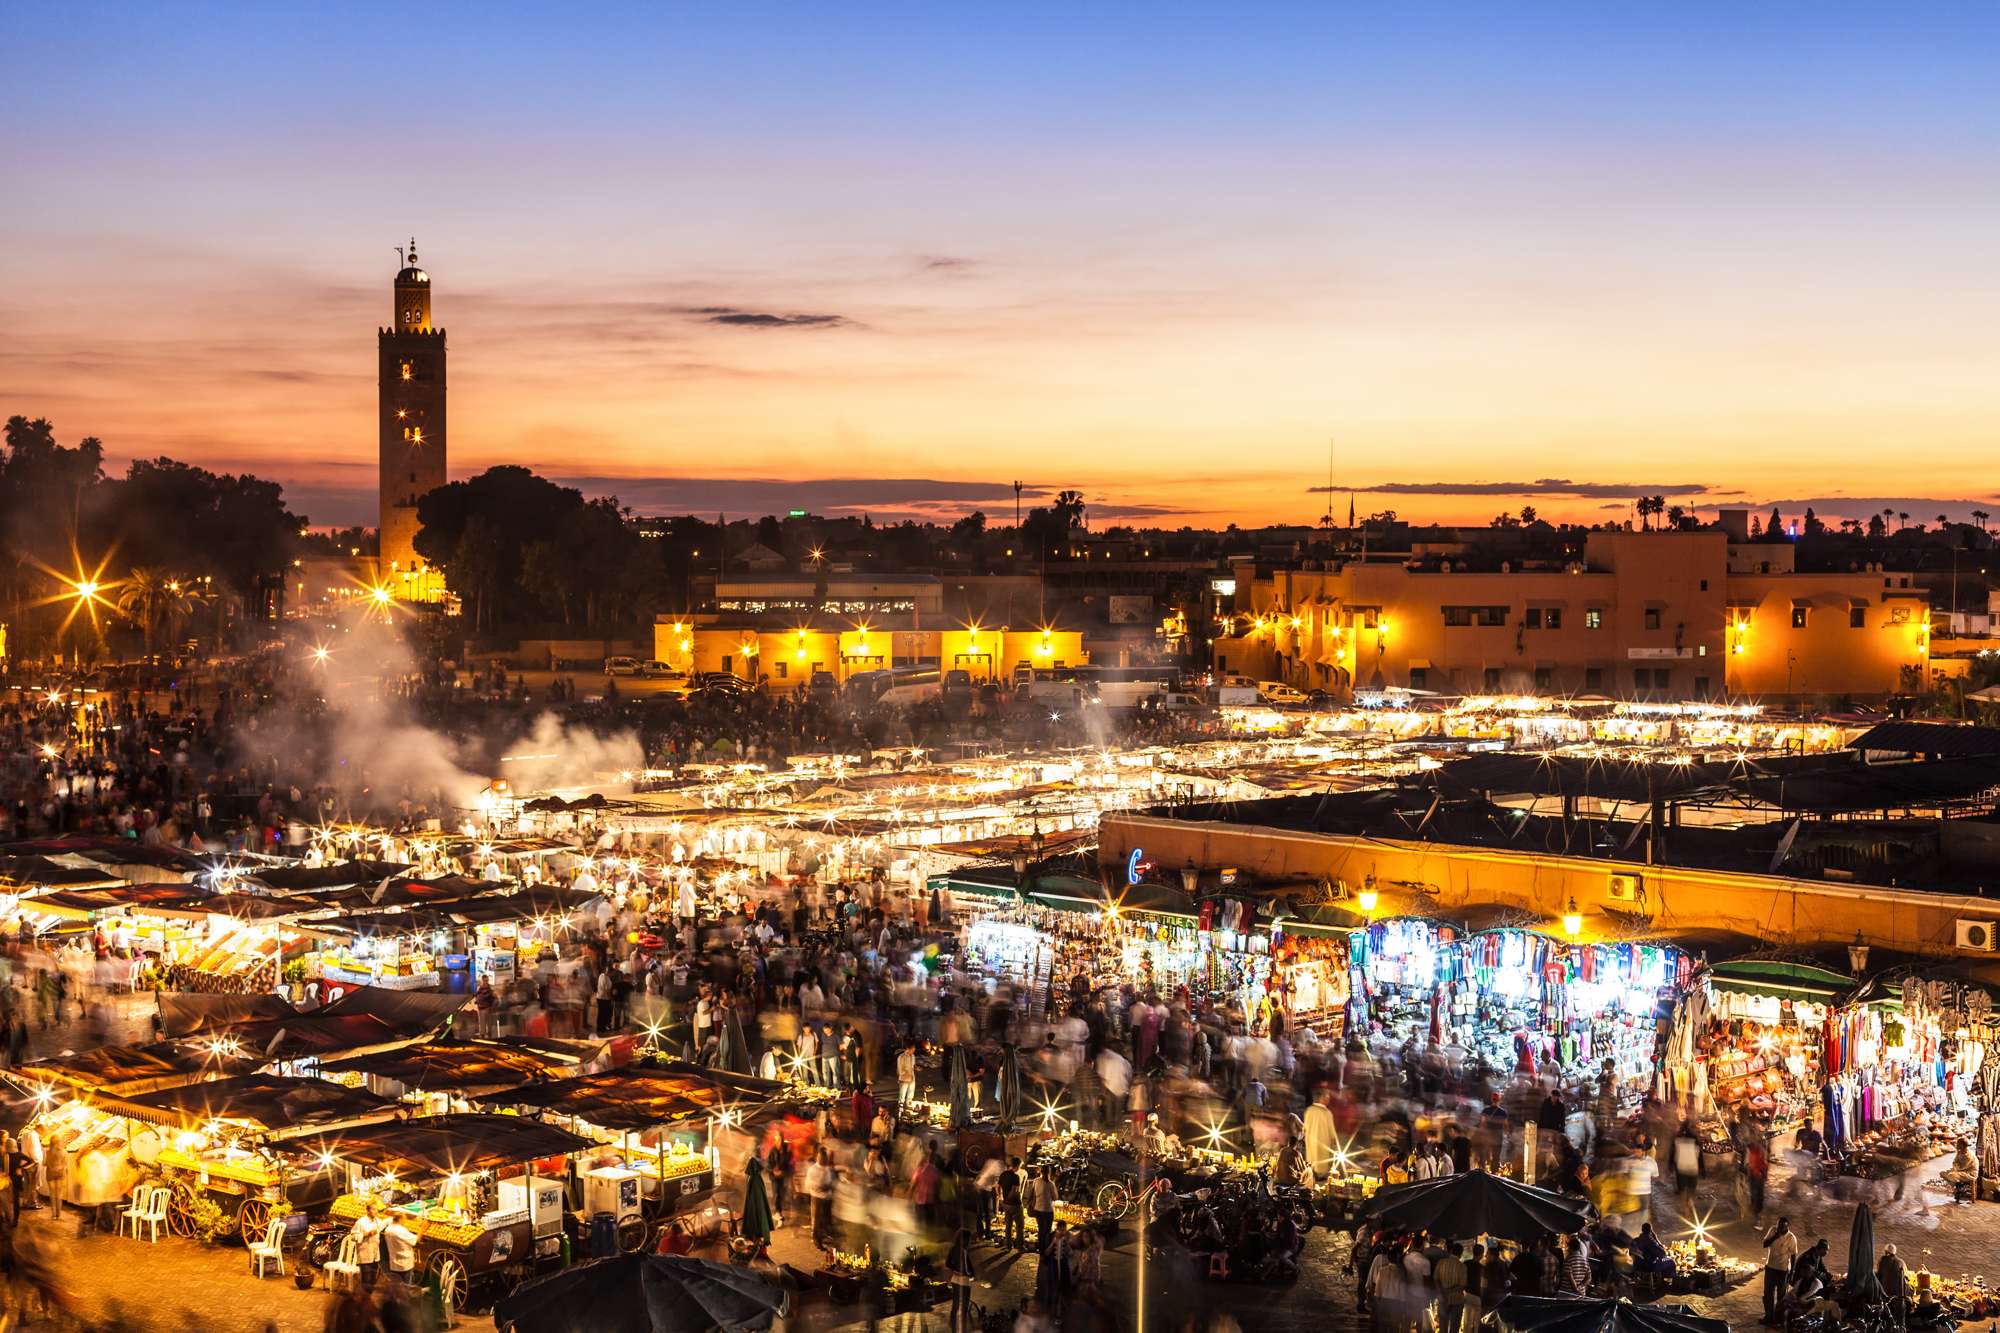 10 days exotic Morocco discovery tour from Marrakech to explore Morocco